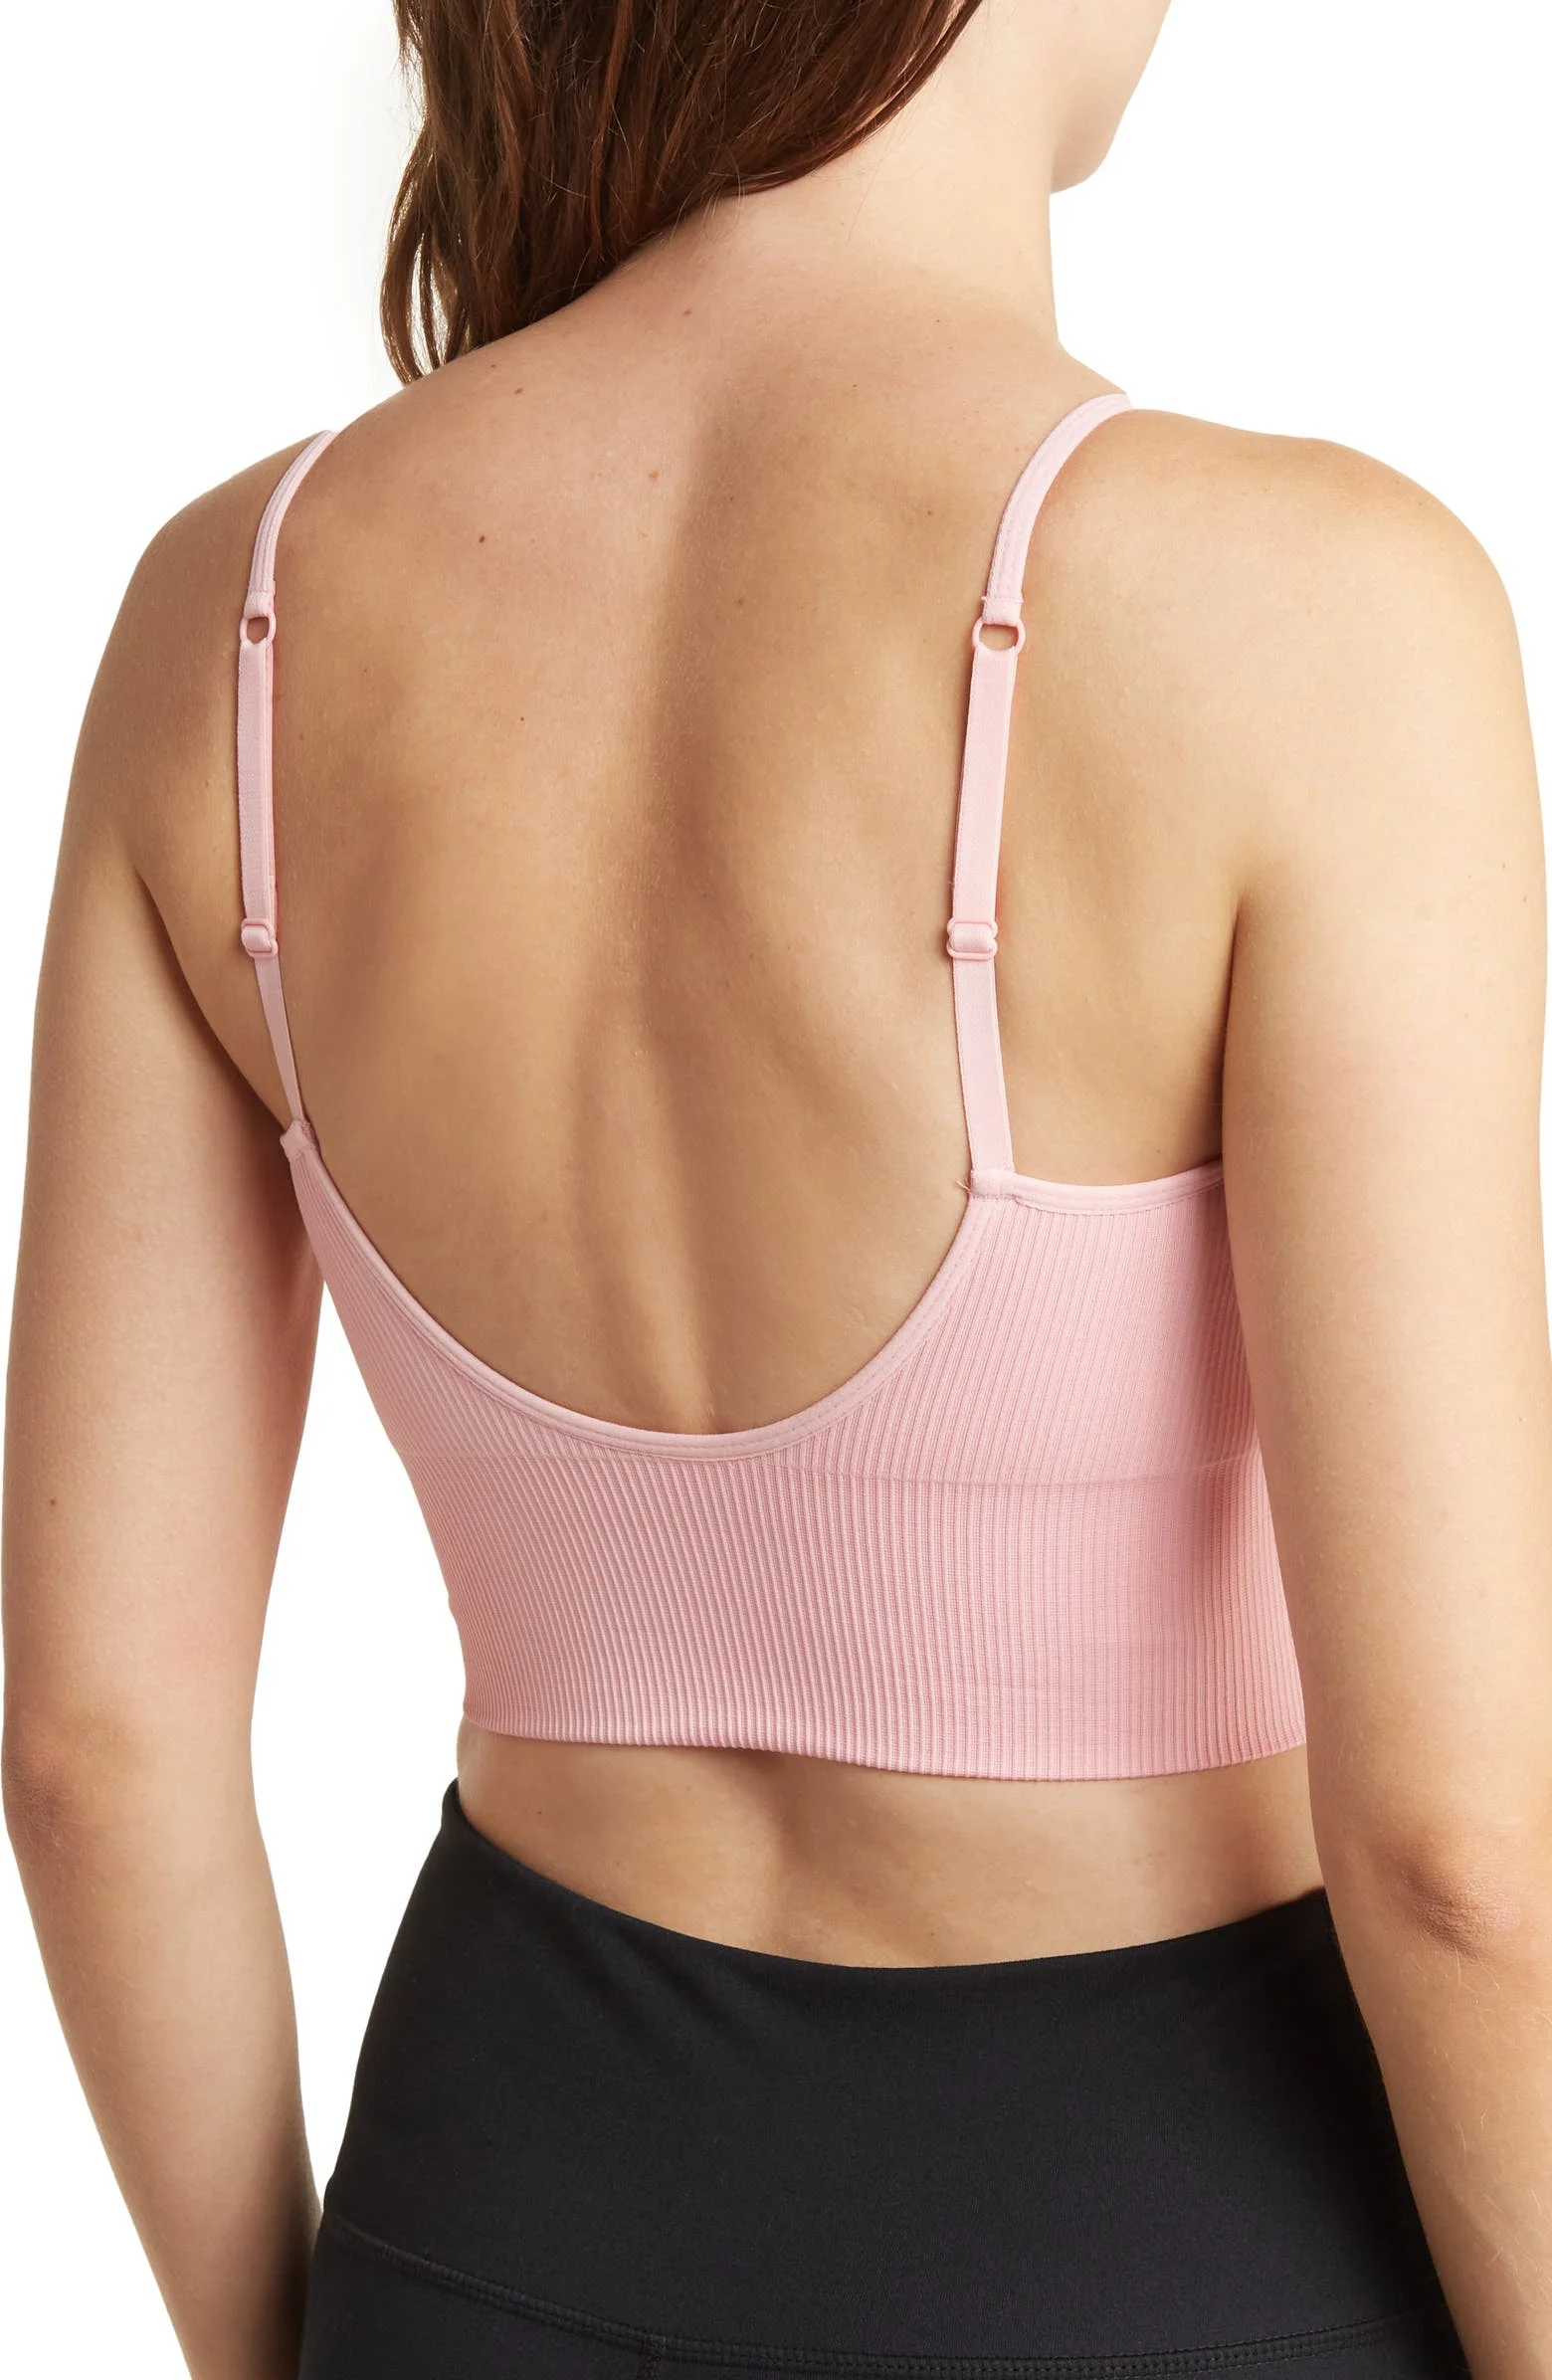 Zella Z by Loxy Long Line Seamless Bra Top Black Y Strap Sports Bra NWt New  MED - $52 New With Tags - From Lea